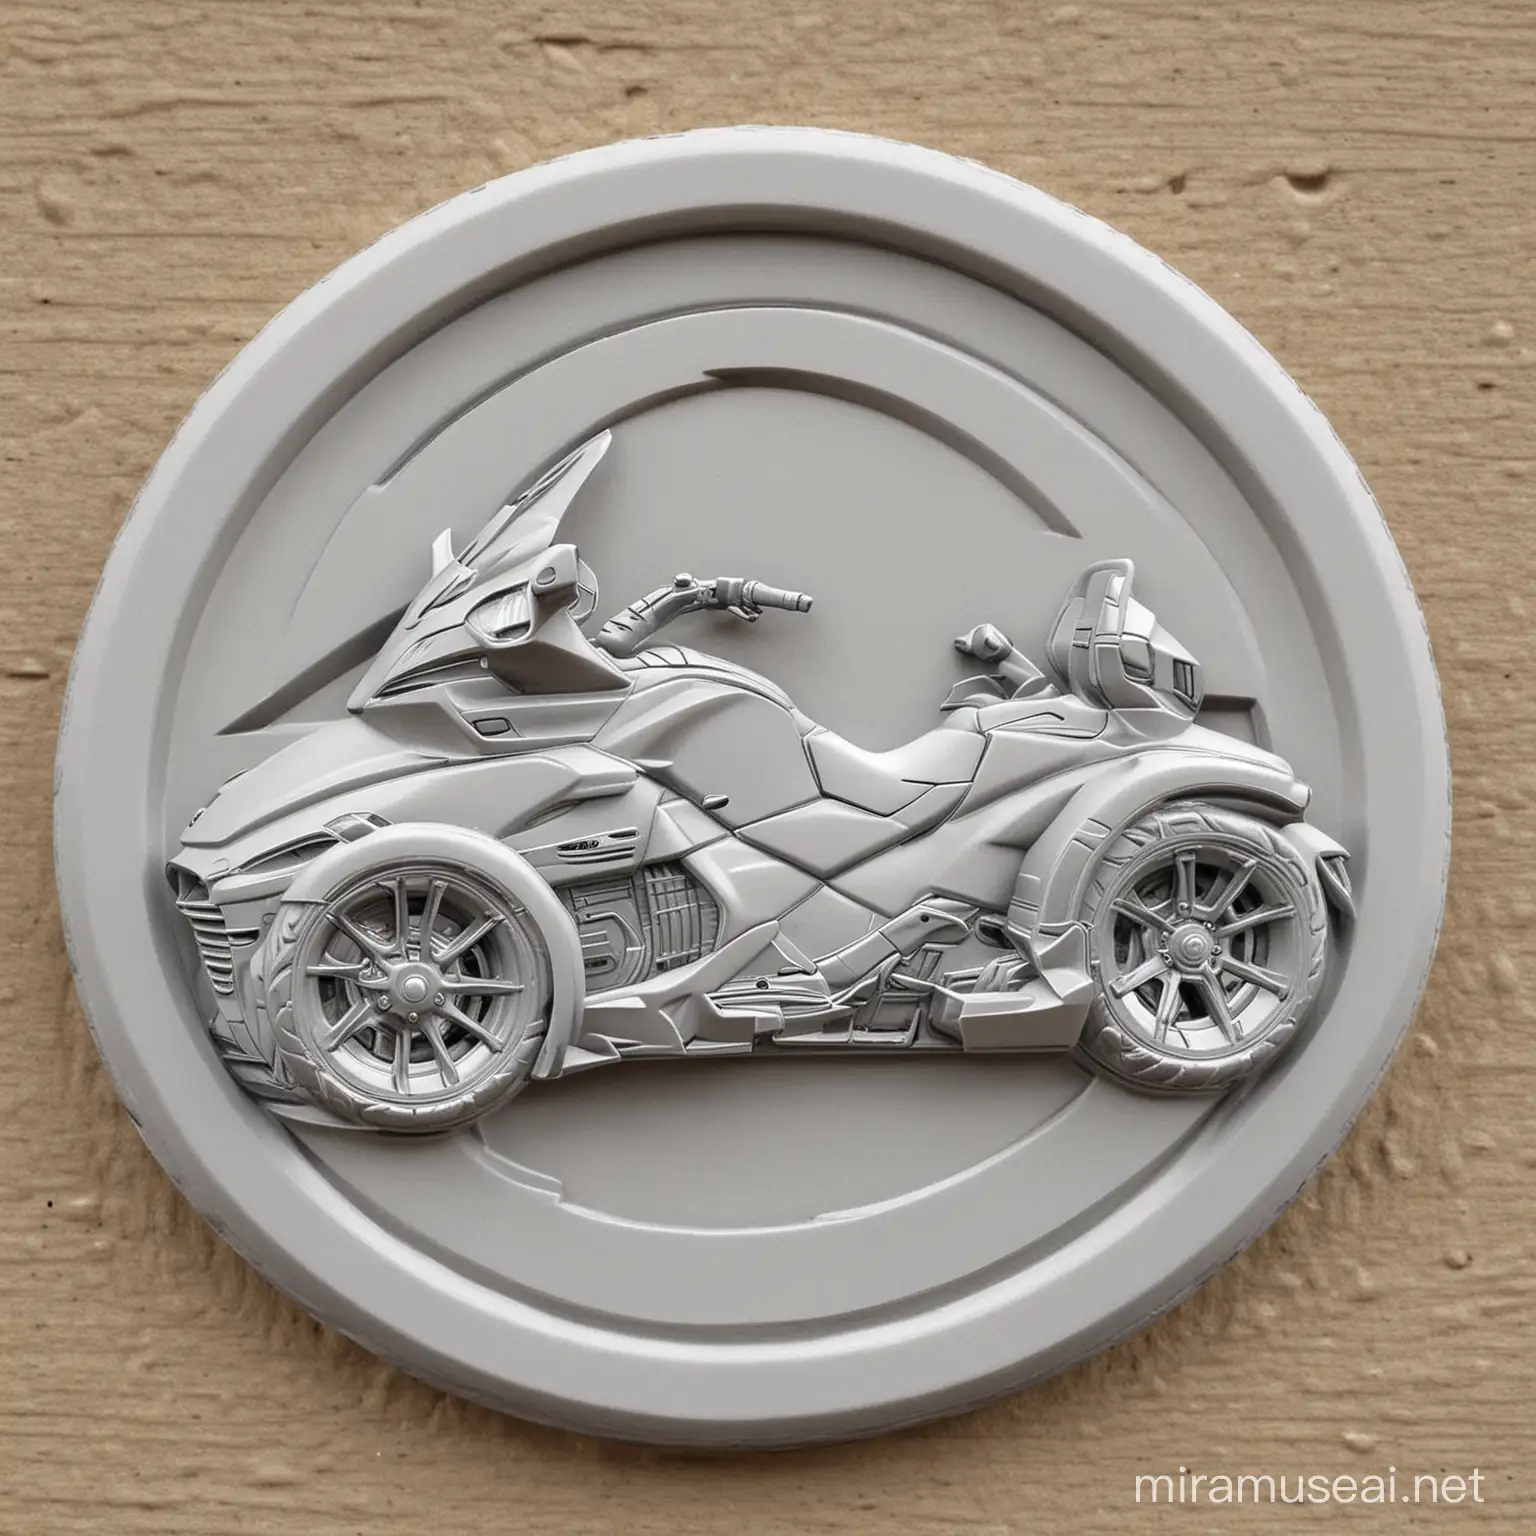 Canam Spyder RT Bas Relief Sculpture Intricately Carved ThreeWheeled Motorcycle Artwork